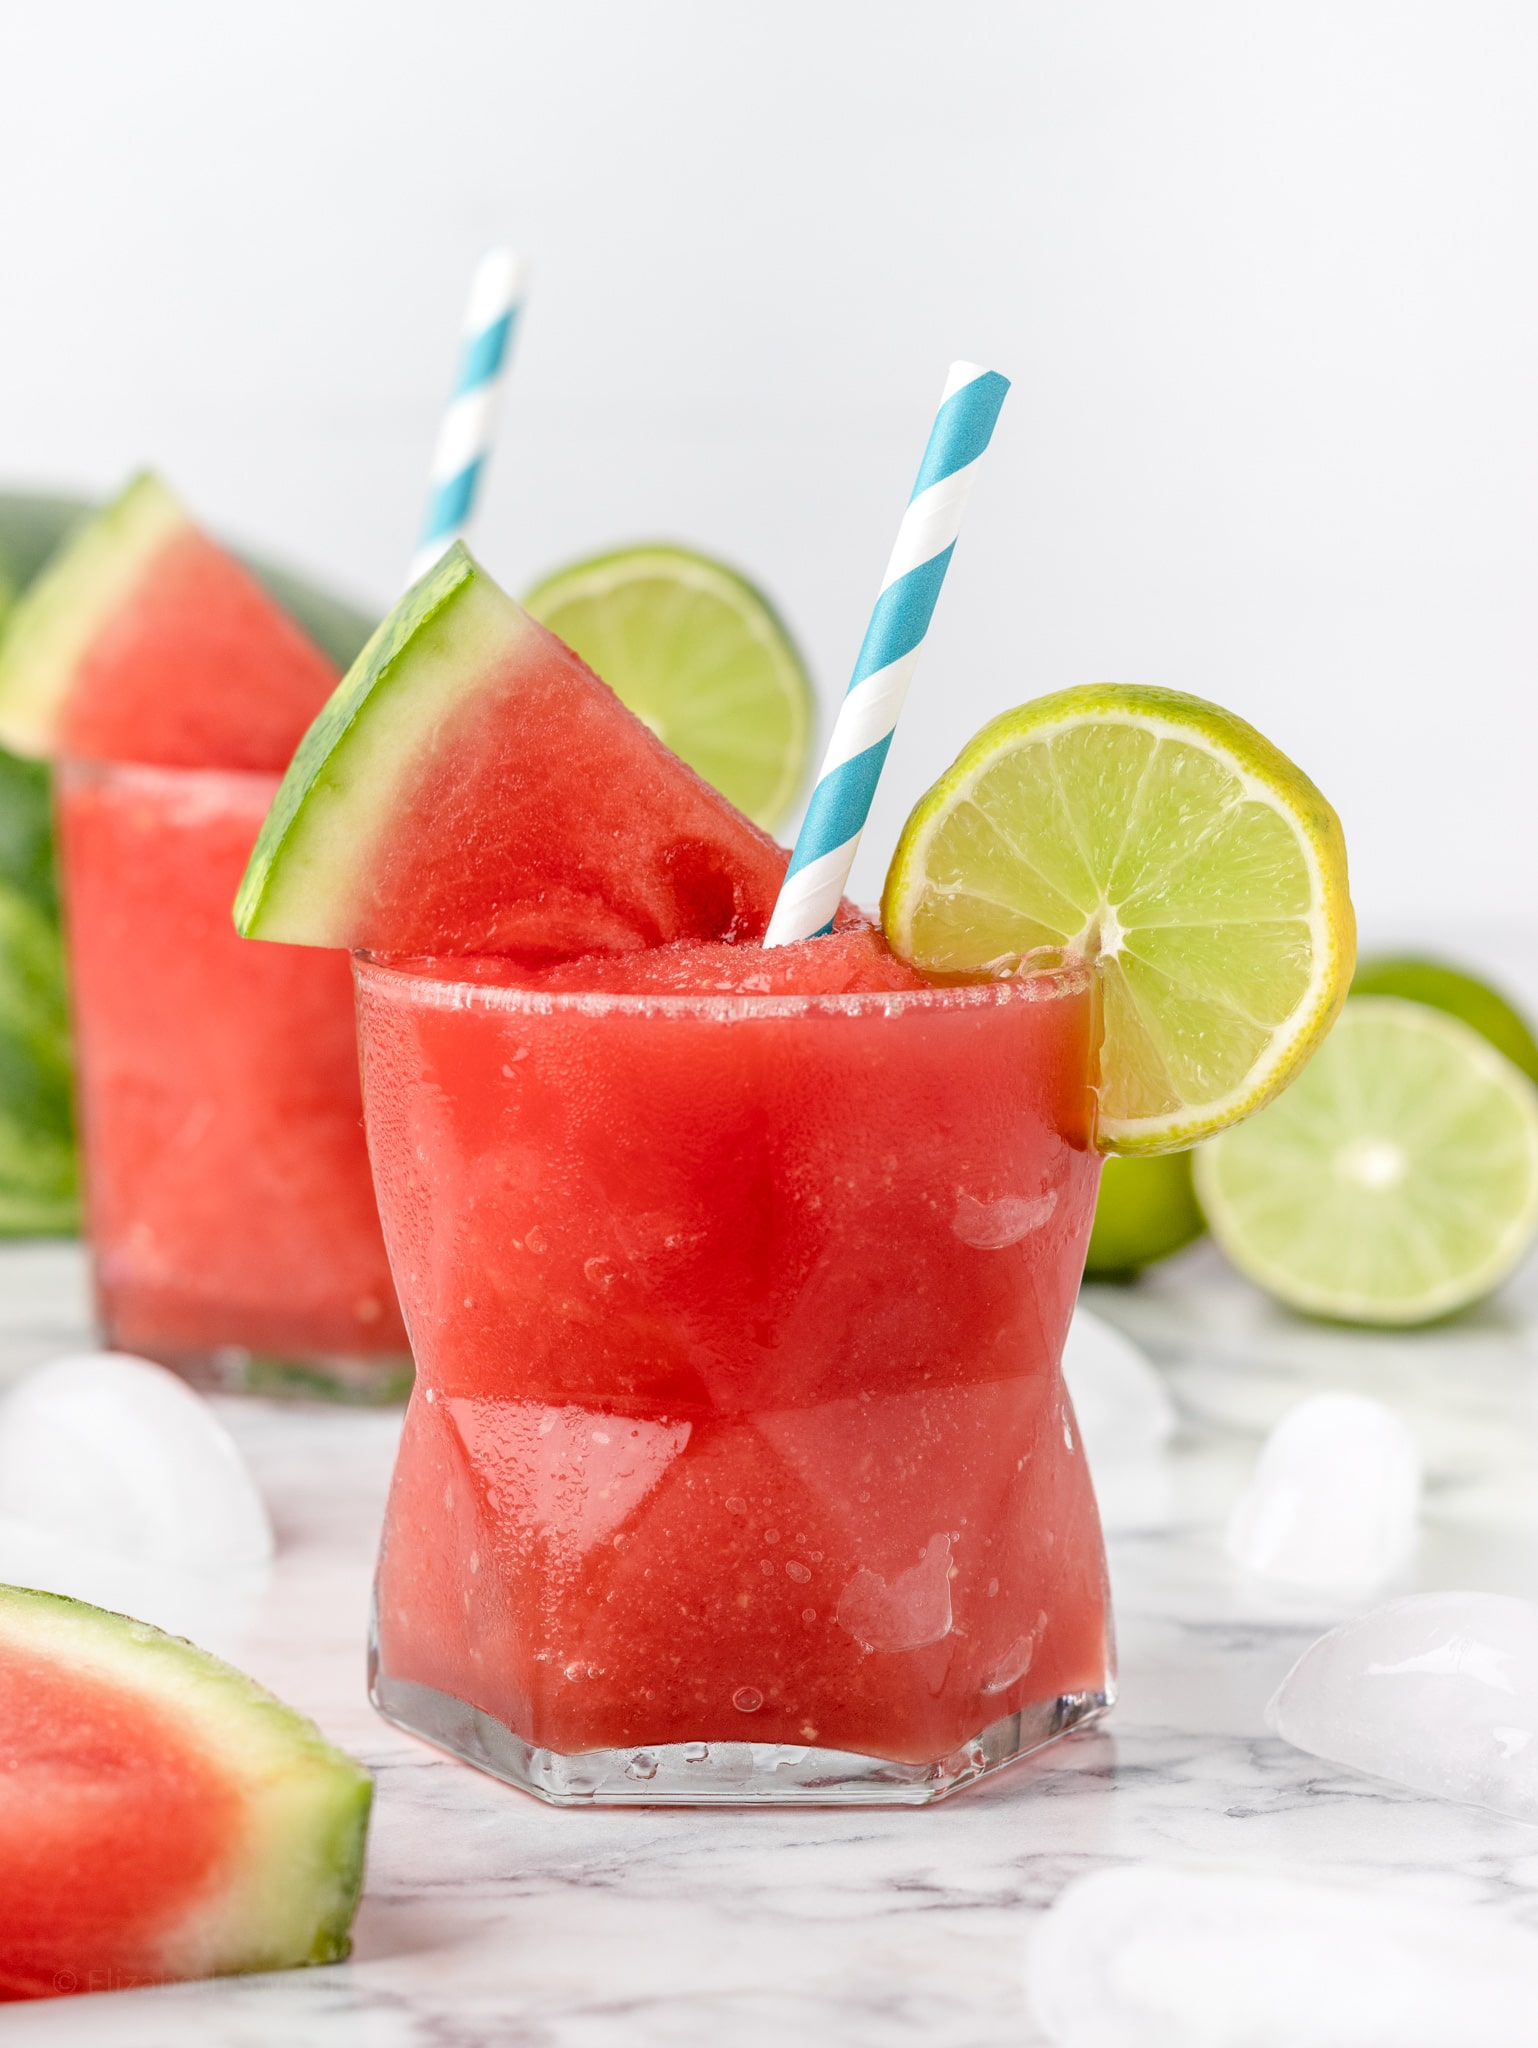 Two watermelon lime slush with blue striped straw, a lime slice, and a watermelon slice.